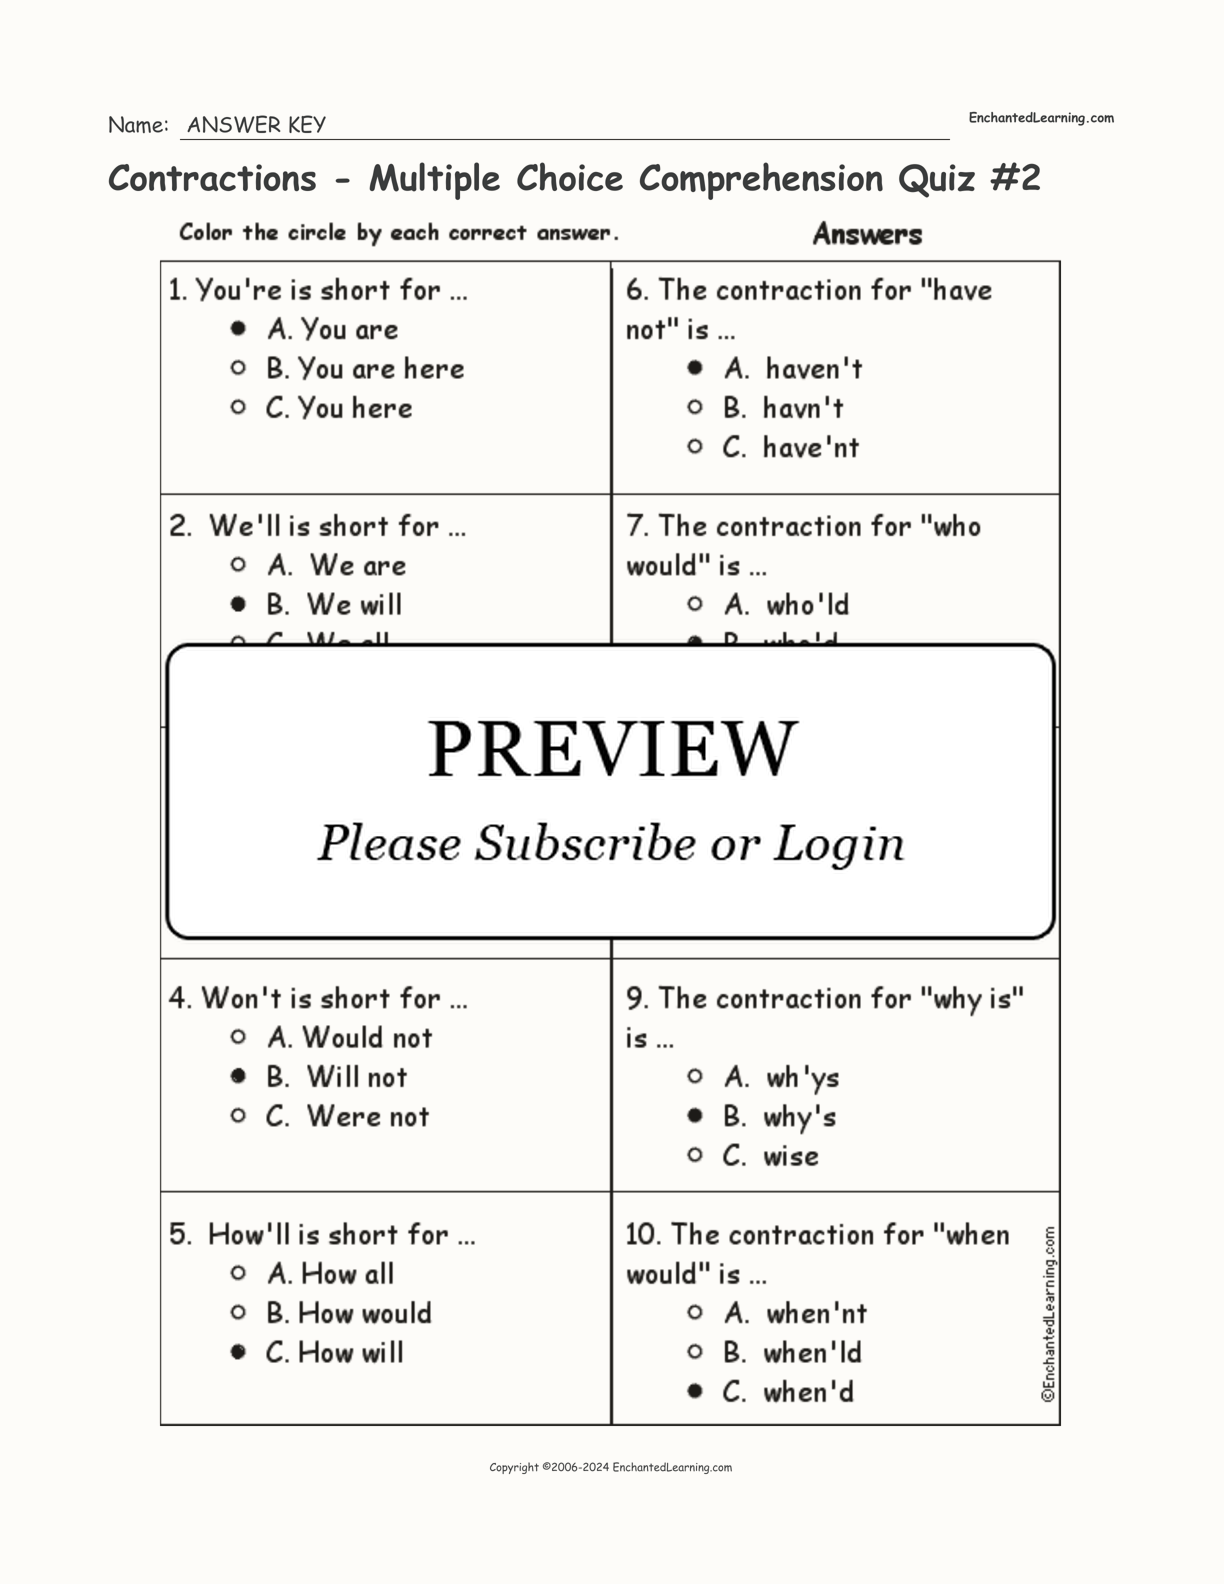 Contractions - Multiple Choice Comprehension Quiz #2 interactive worksheet page 2